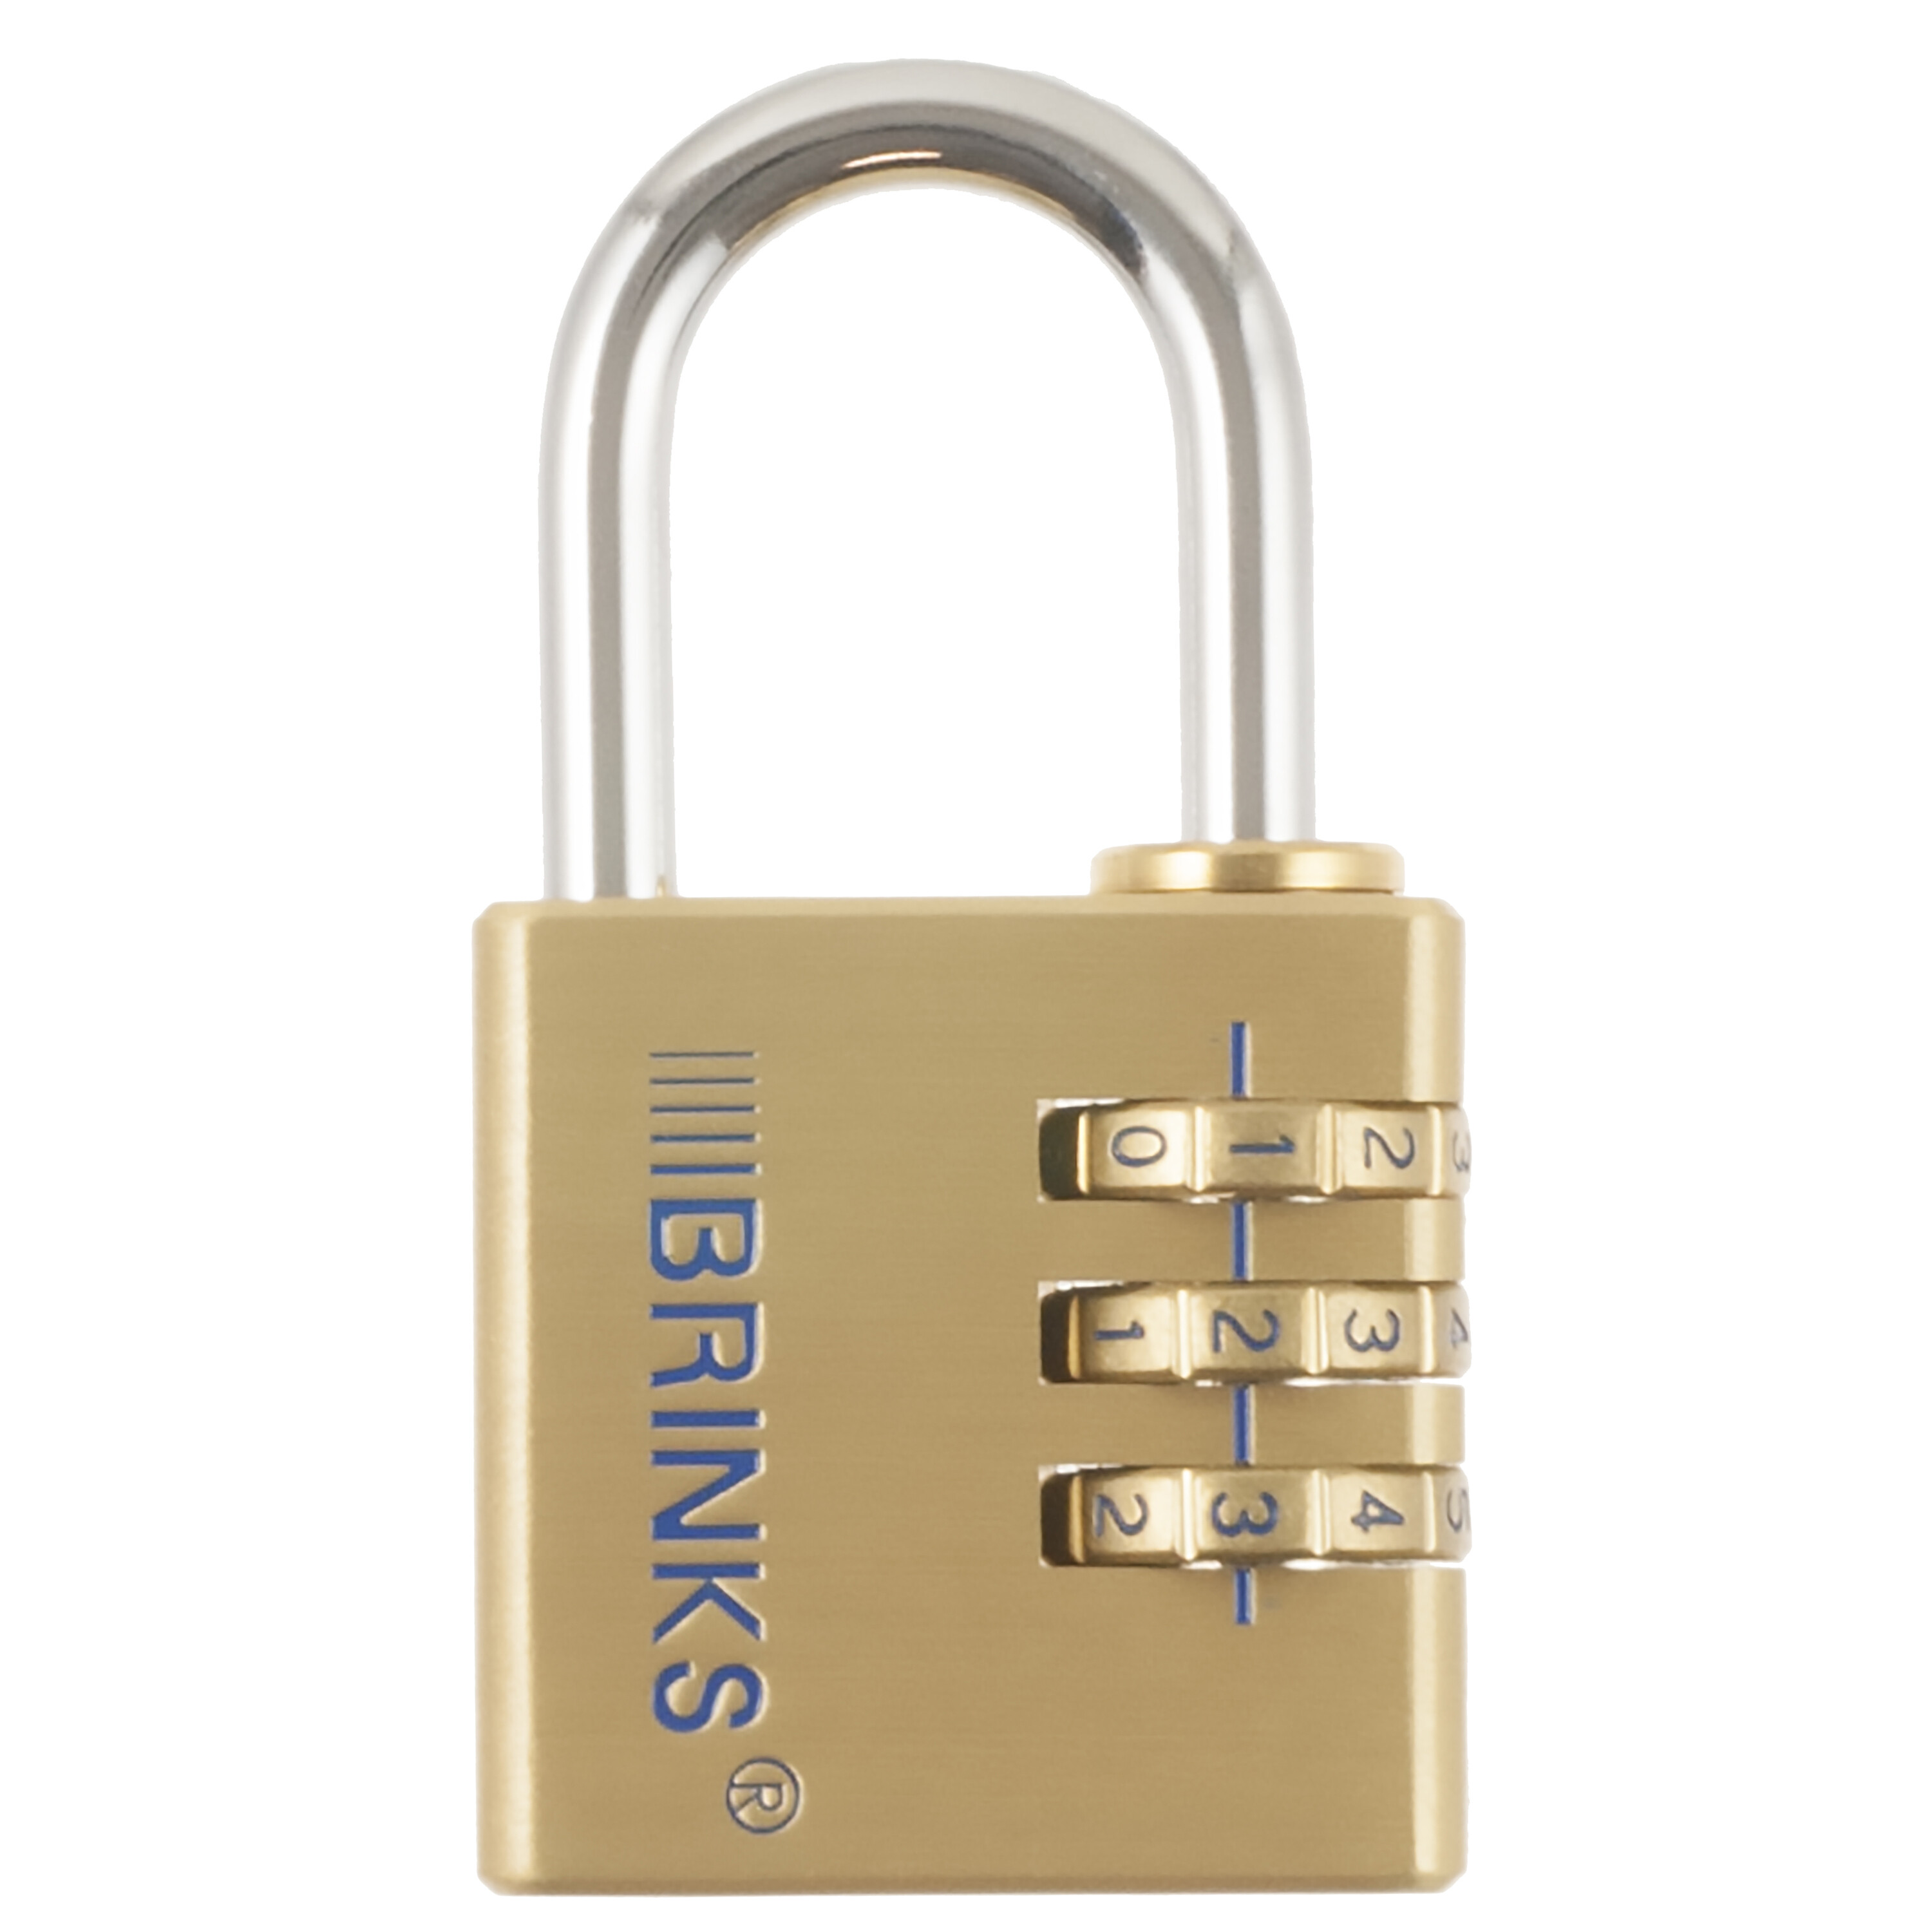 Details about   BRINKS Key Padlock Weather Resistant High Security 171 40001 New 